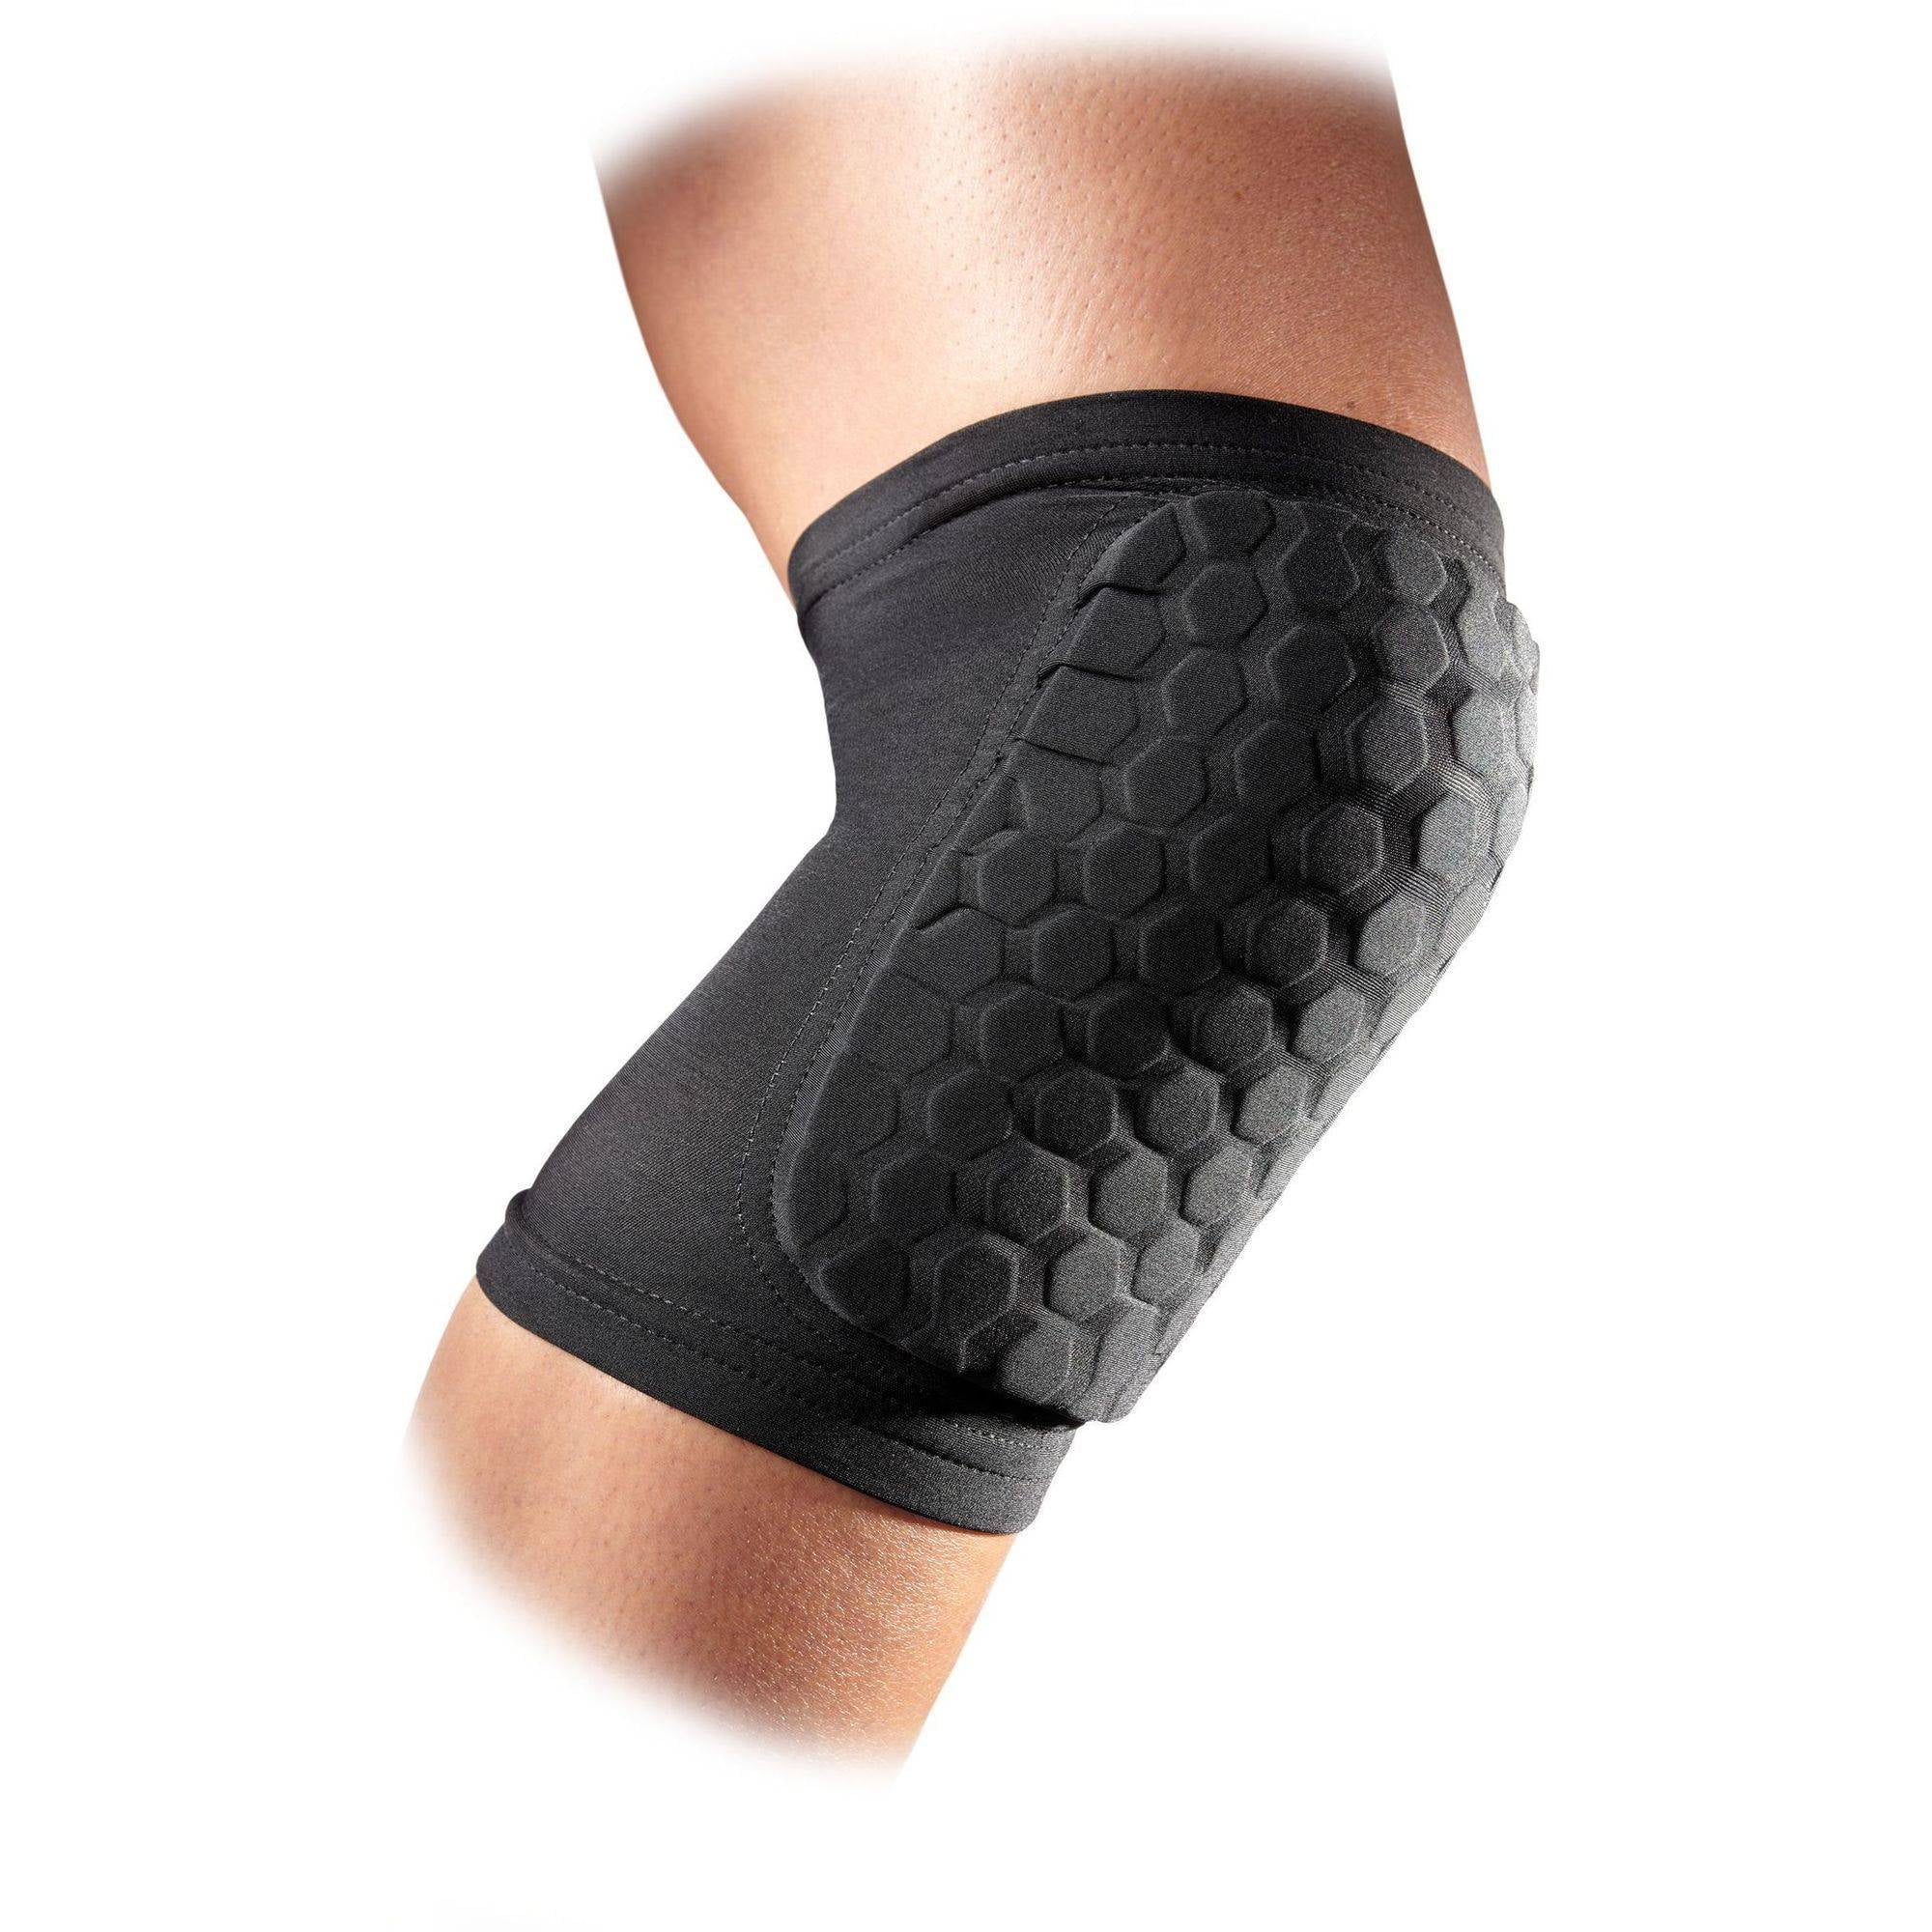 2 Sleeves Sold as Pair Youth & Adult Sizes Basketball Football & All Contact Sports Mcdavid 6440 Hex Knee Pads/ Elbow Pads/ Shin Pads for Volleyball 